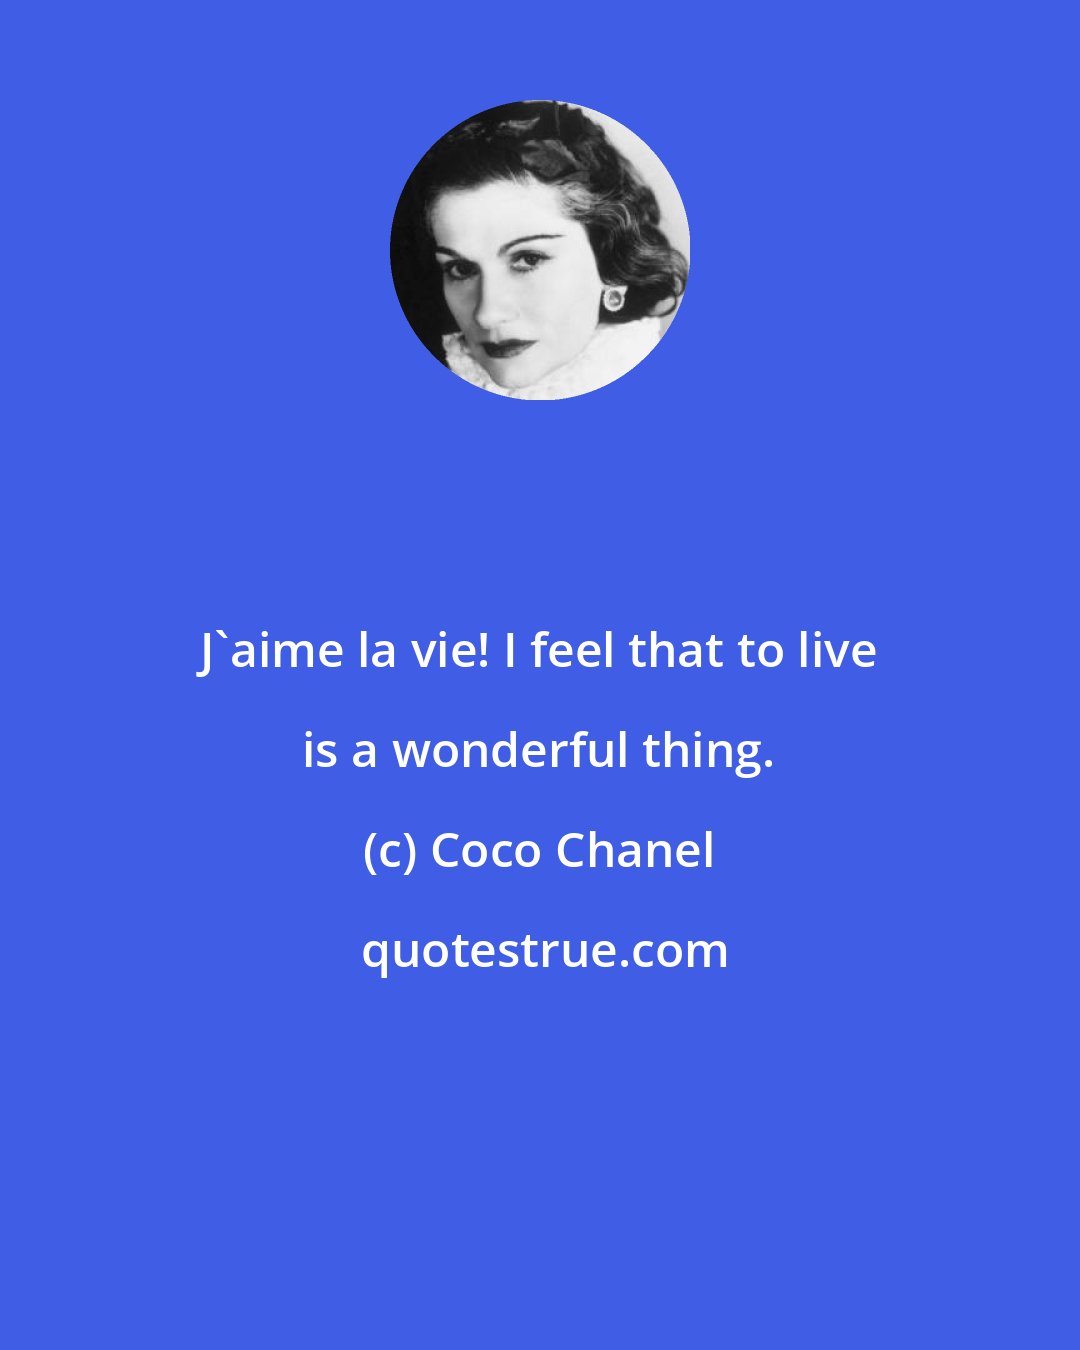 Coco Chanel: J'aime la vie! I feel that to live is a wonderful thing.